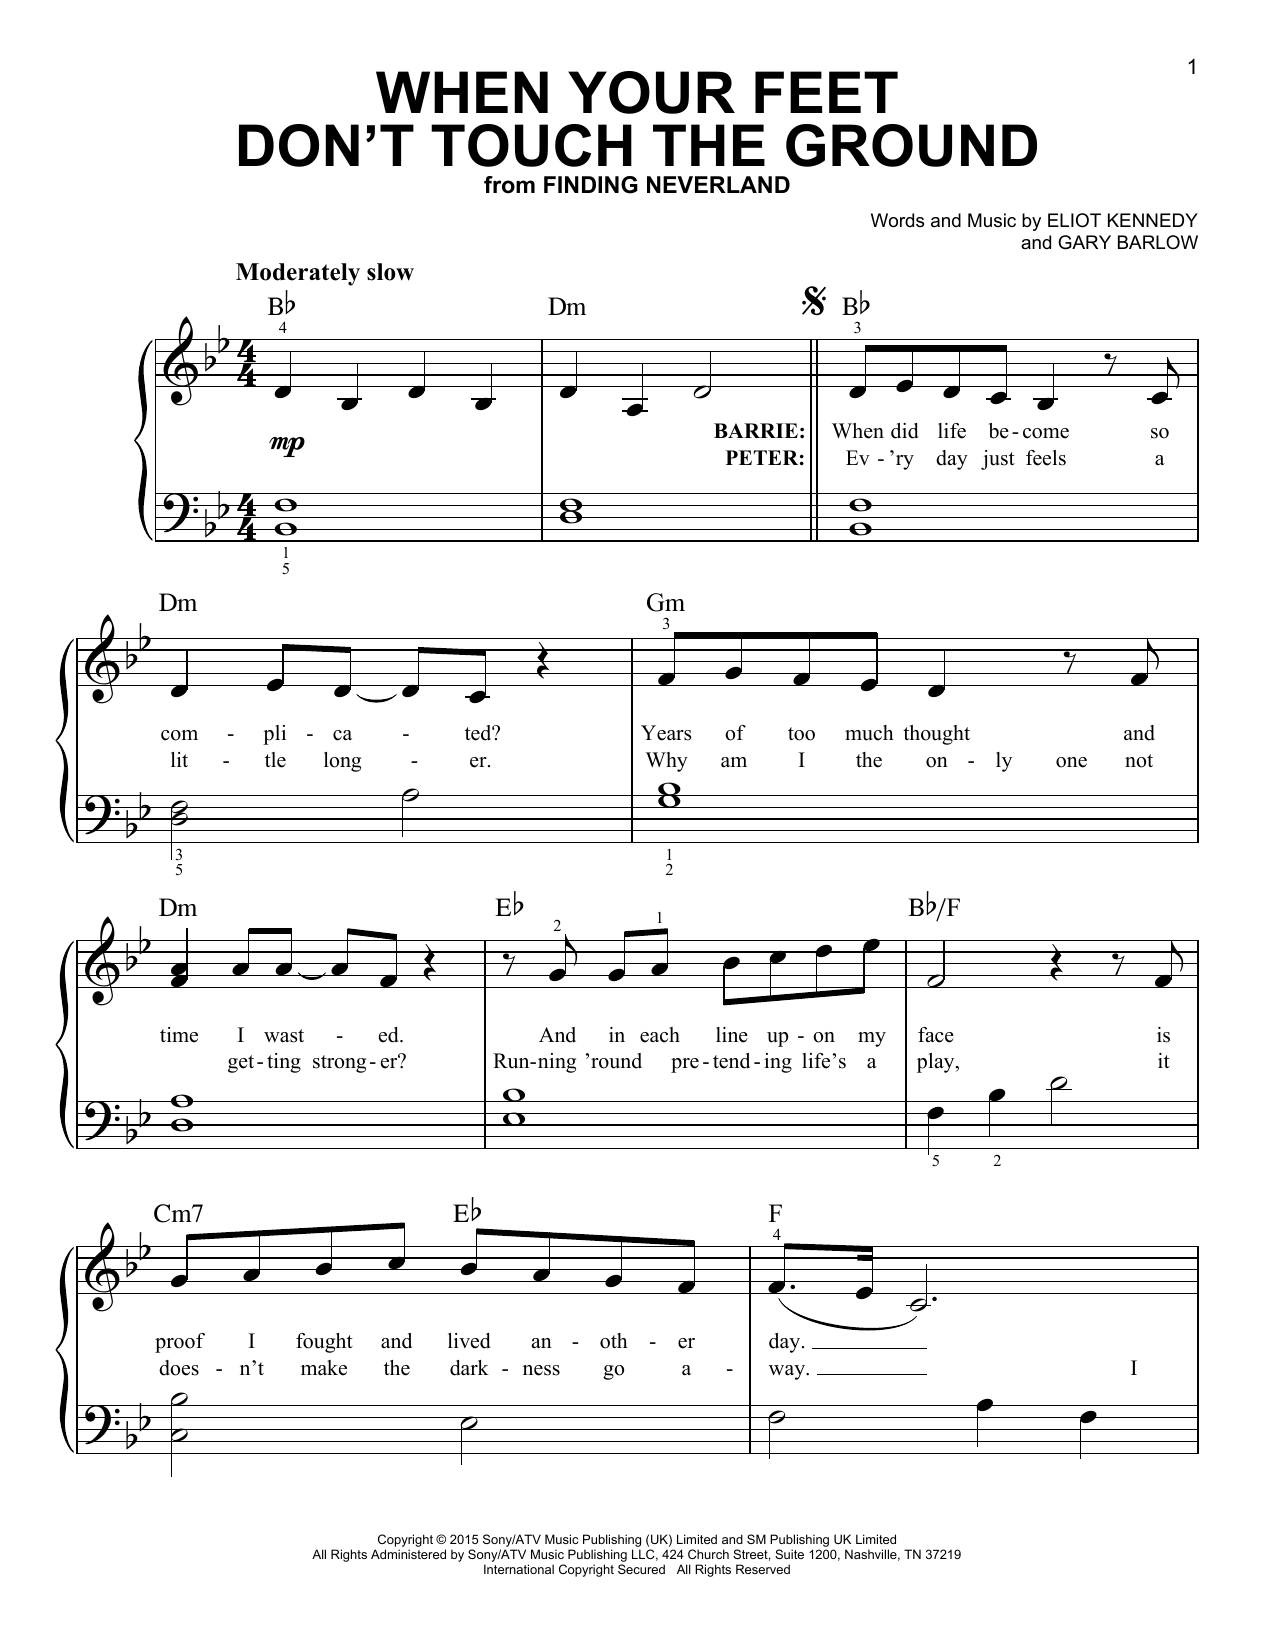 Download Gary Barlow & Eliot Kennedy When Your Feet Don't Touch The Ground ( Sheet Music